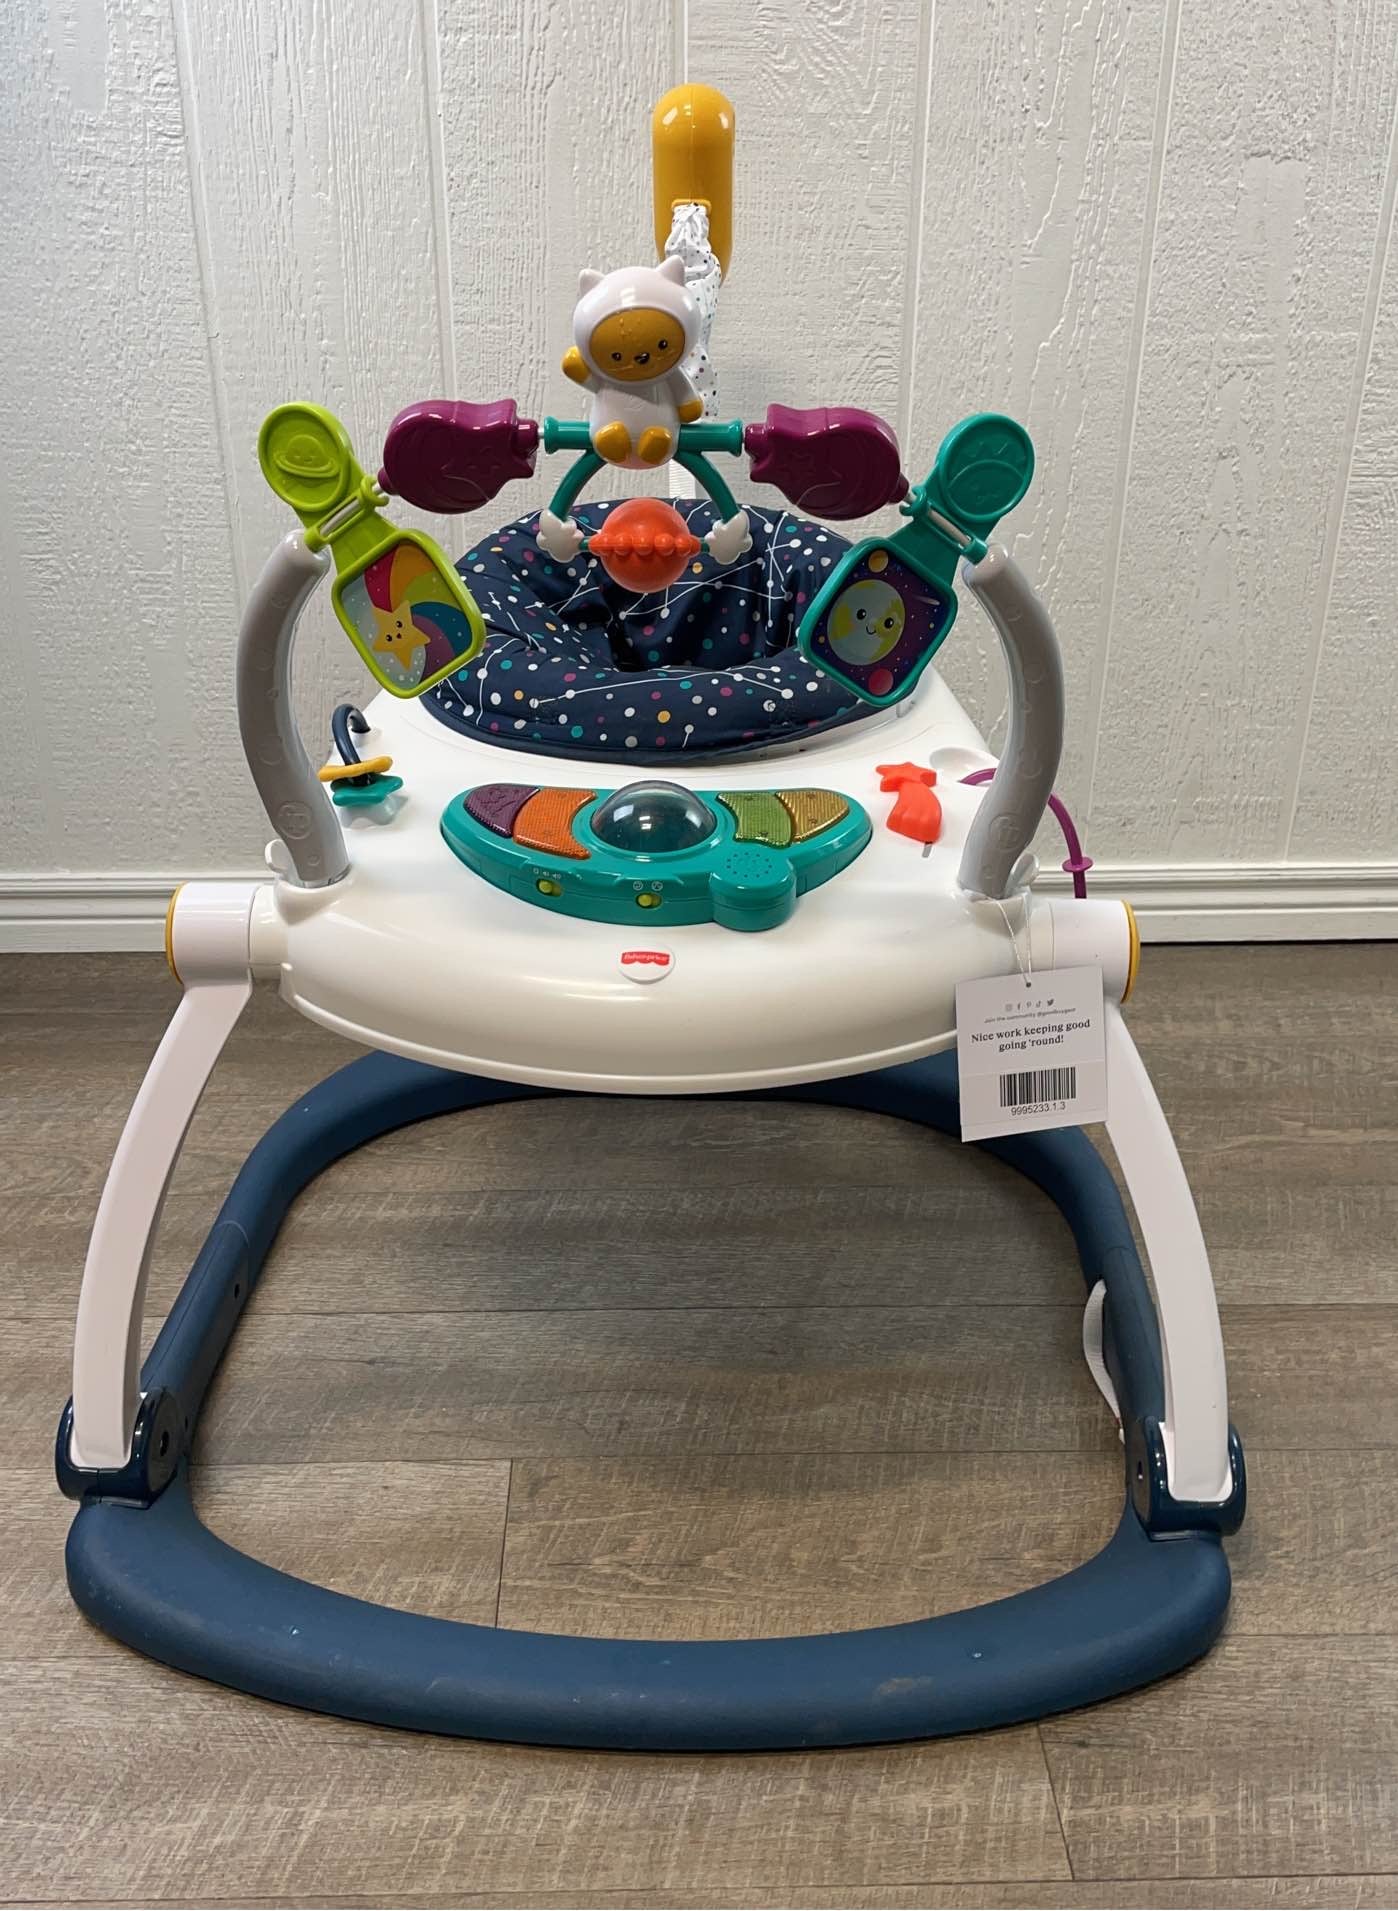 Fisher-Price Astro Kitty Spacesaver Jumperoo